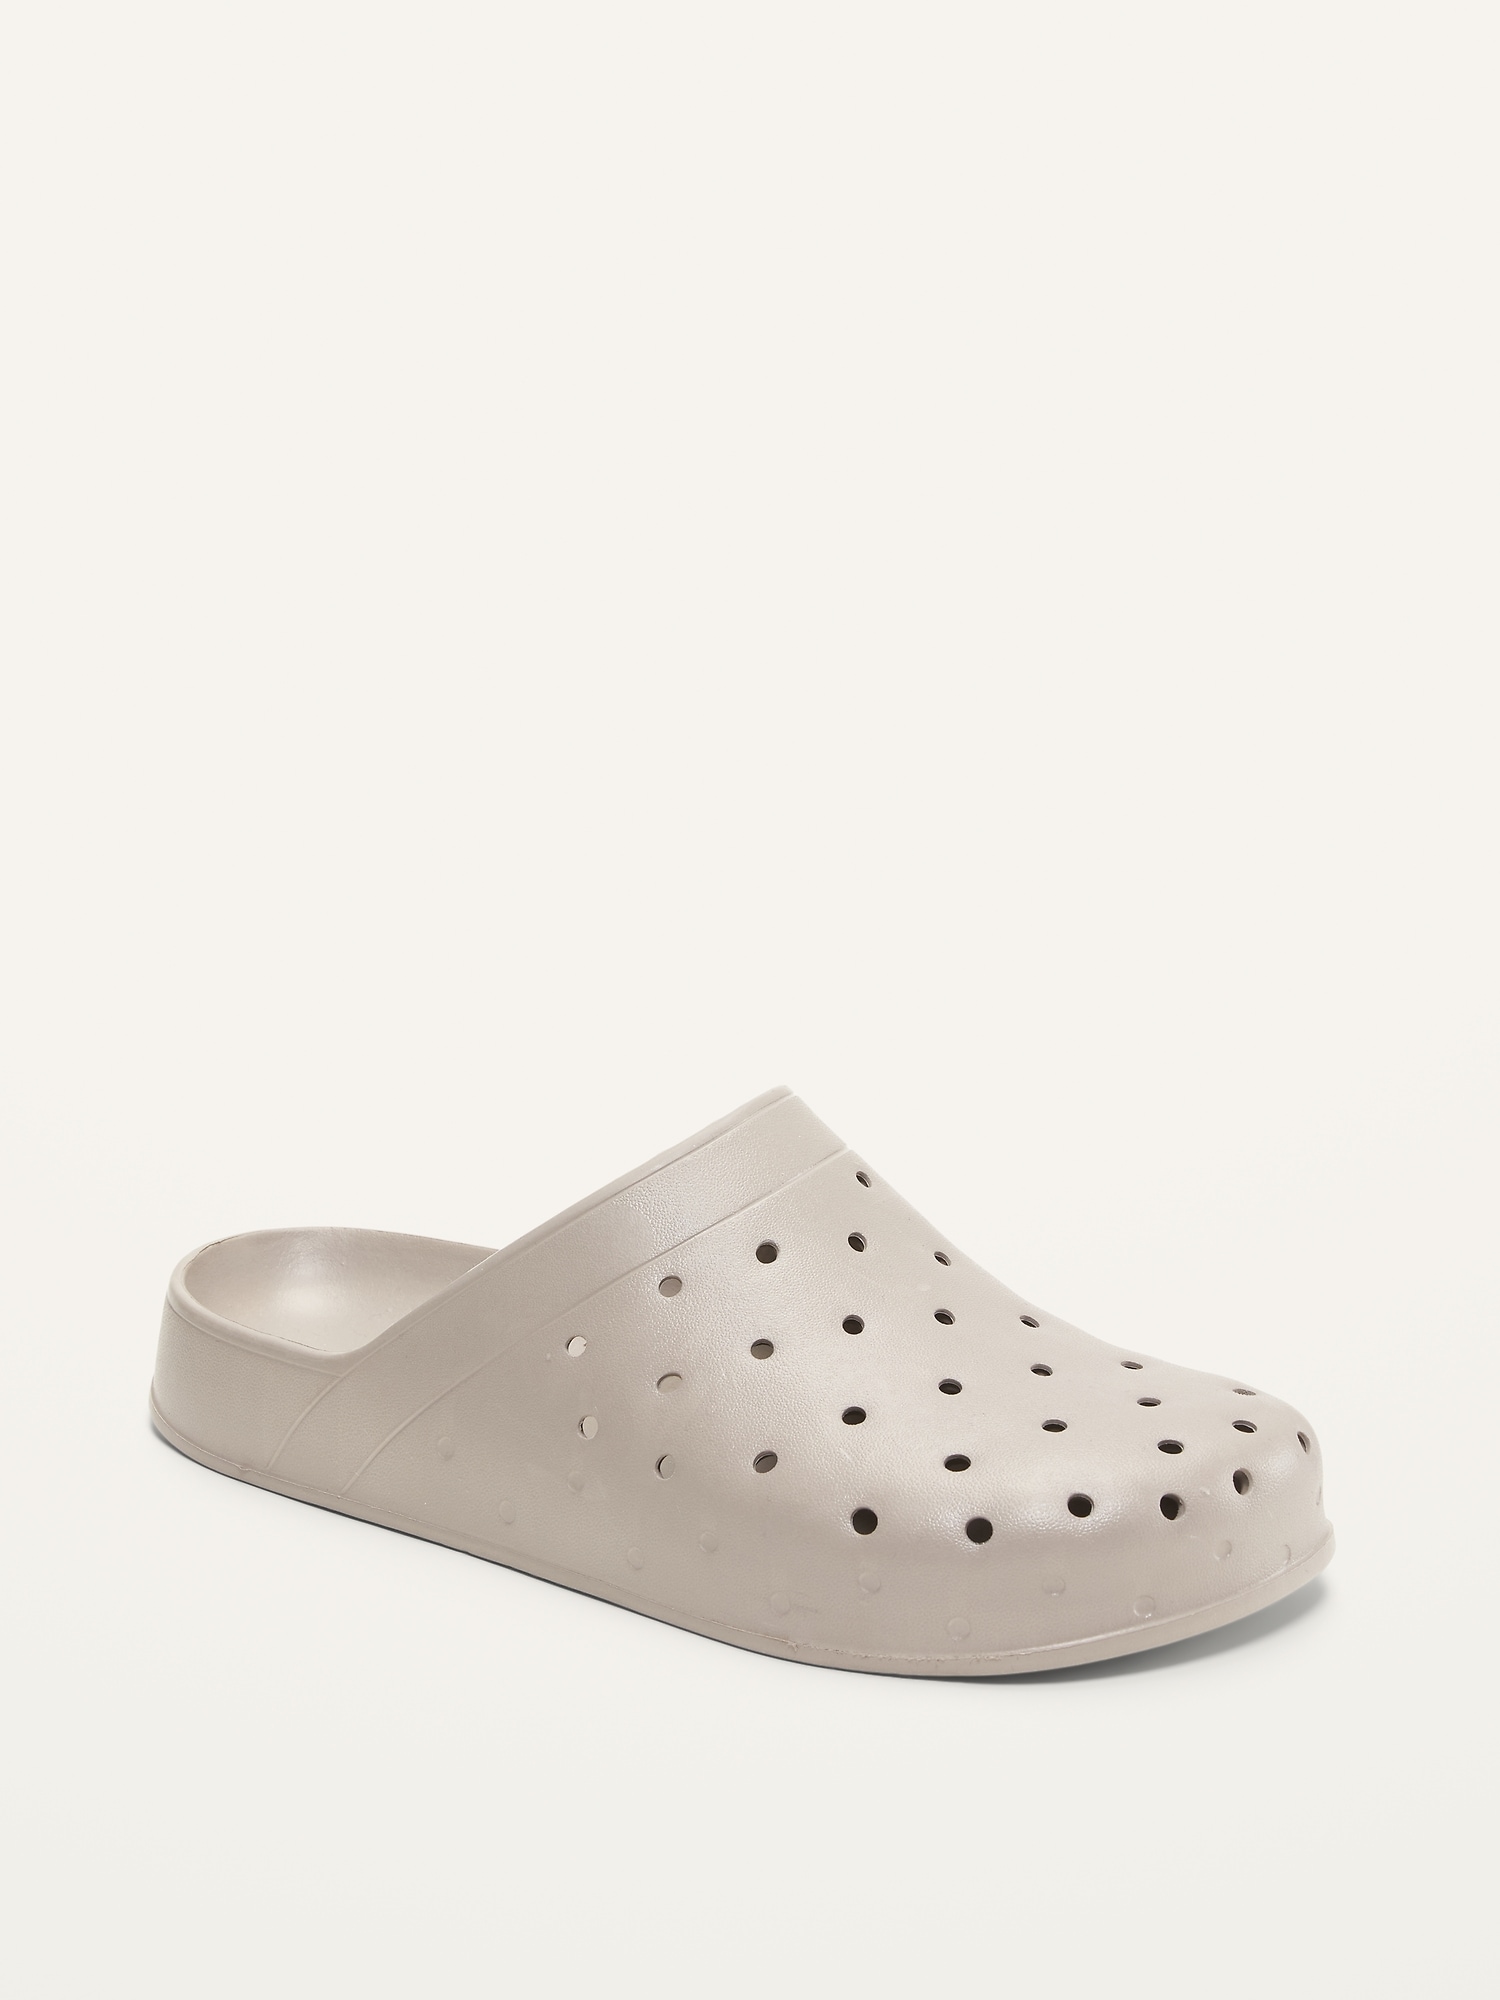 Perforated Clog Shoes (Partially Plant-Based)